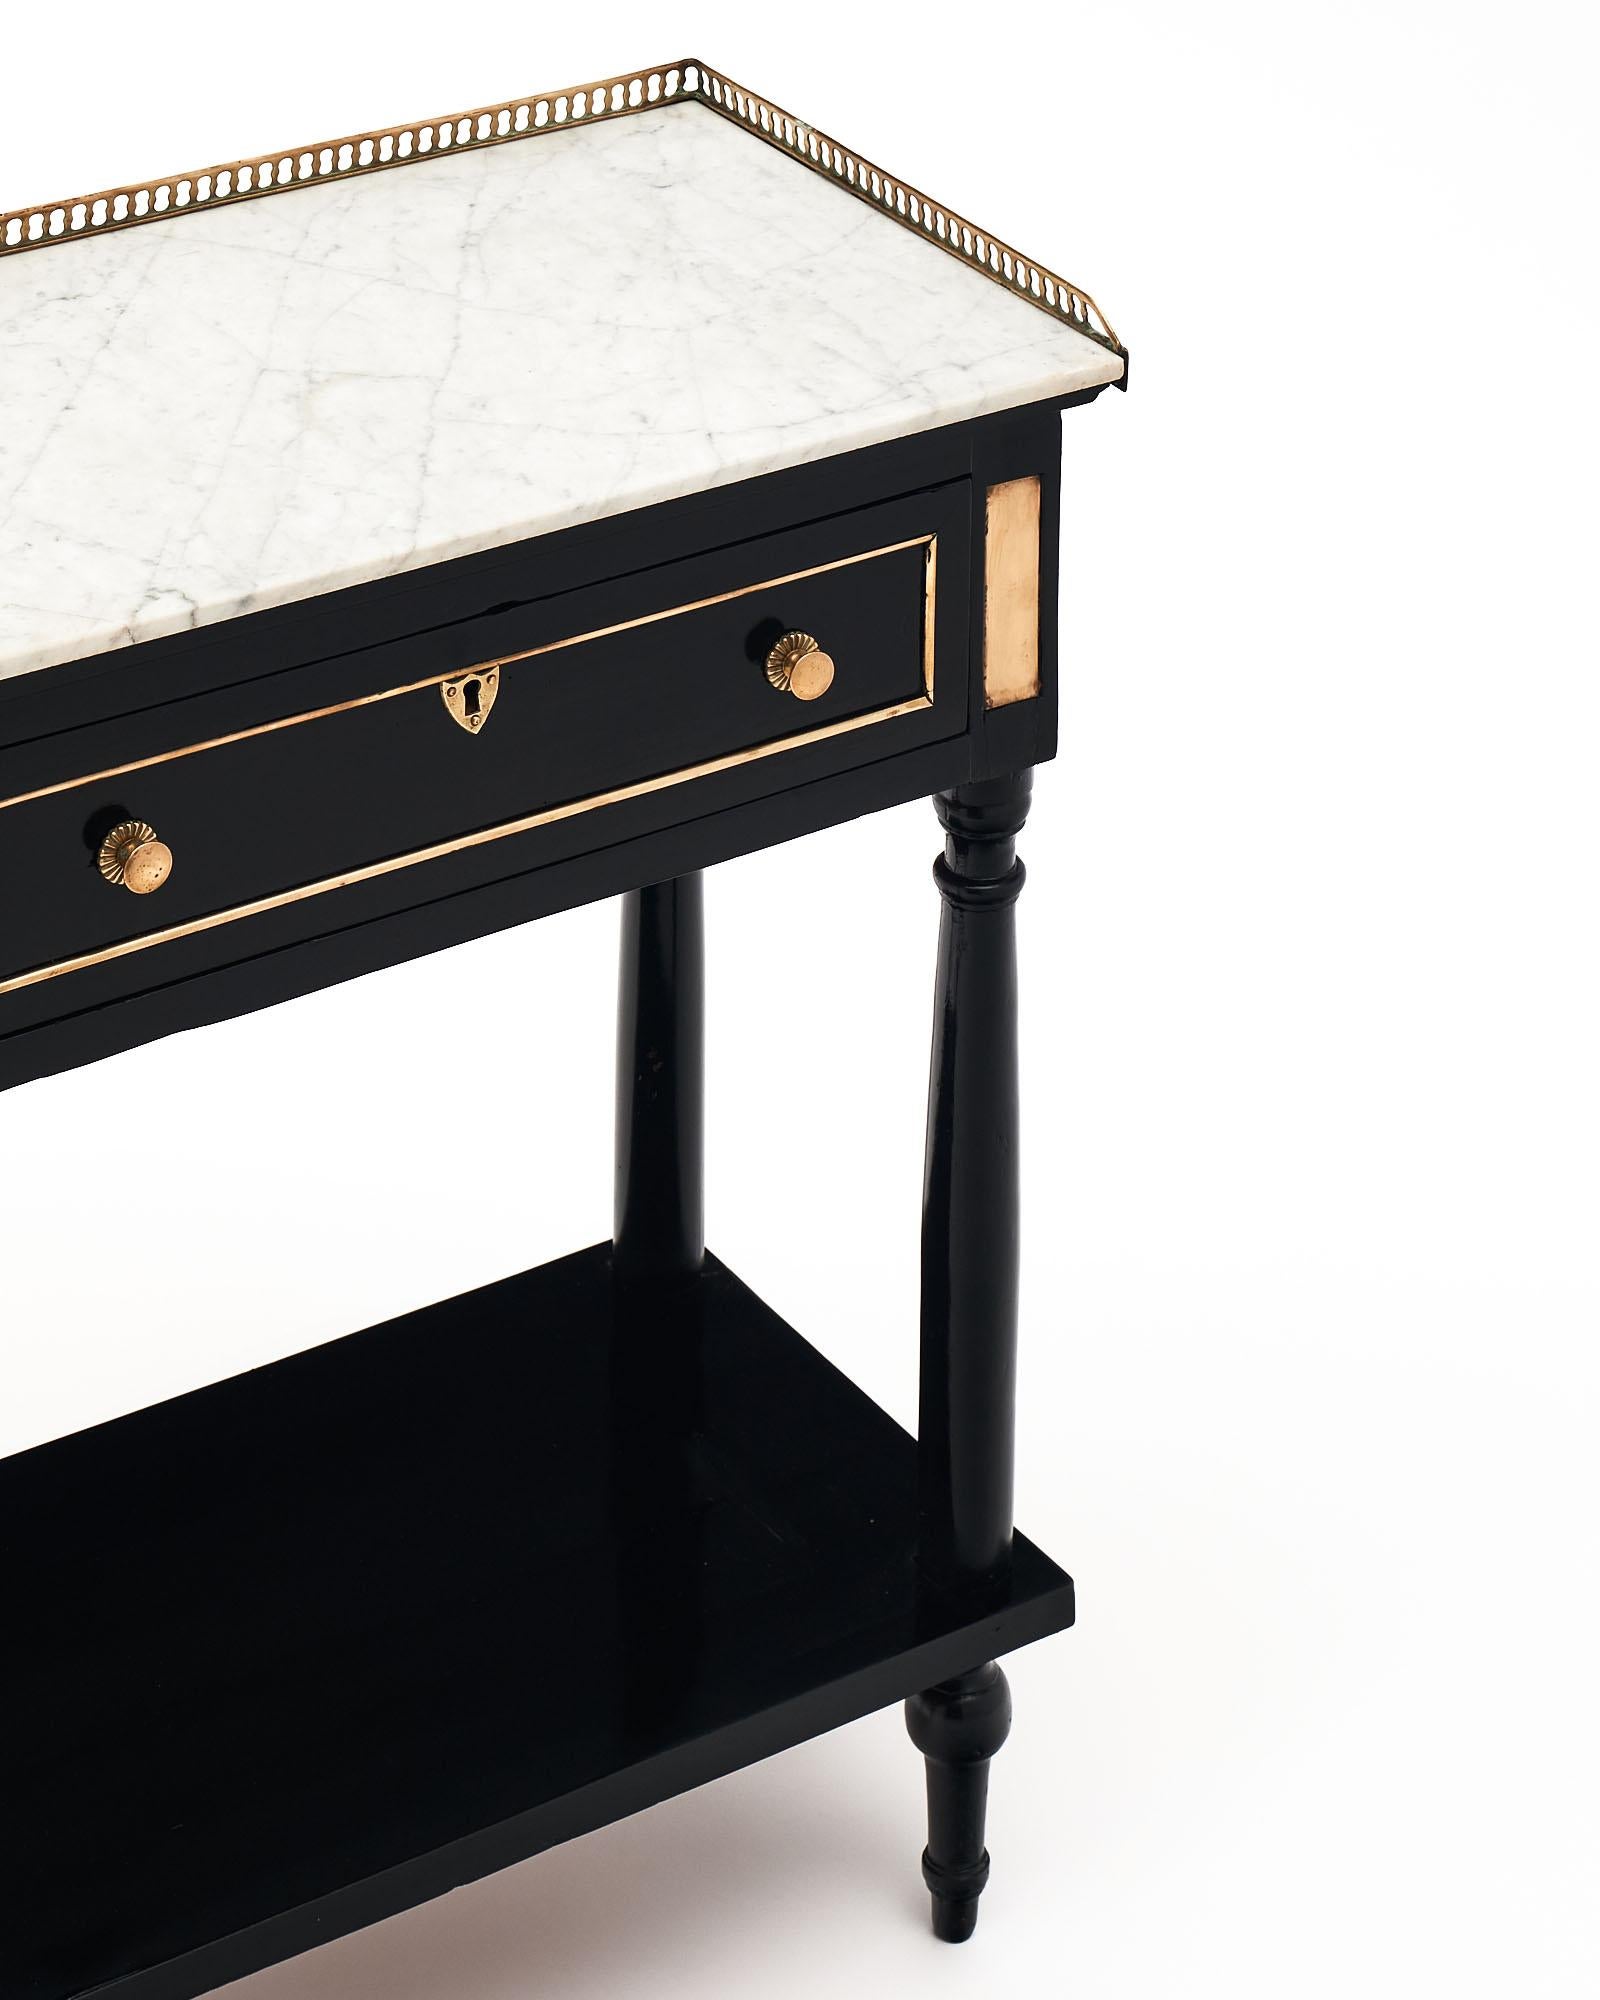 Side table in the Louis XVI style from France. This piece is finished in an ebonized French polish with a museum-quality luster. The Carrara marble top is surrounded by an open brass gallery. Brass trim and detailing can be found throughout. There